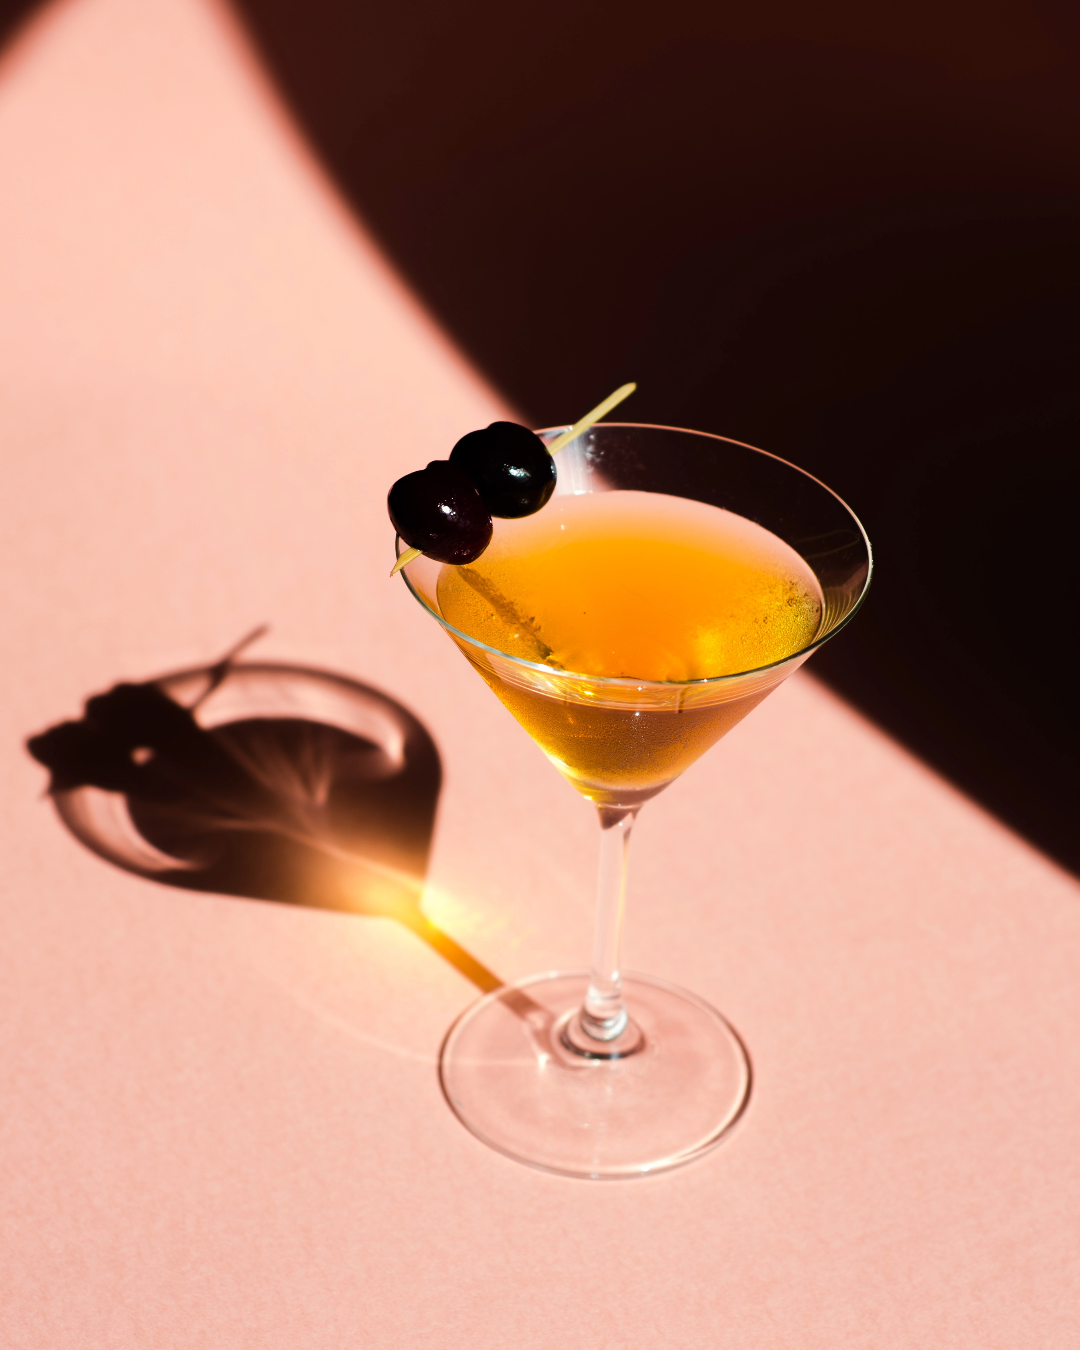 long-stem cocktail glass filled with a brown liquid and garnished with 2 brandied cherries sat on a pink surface